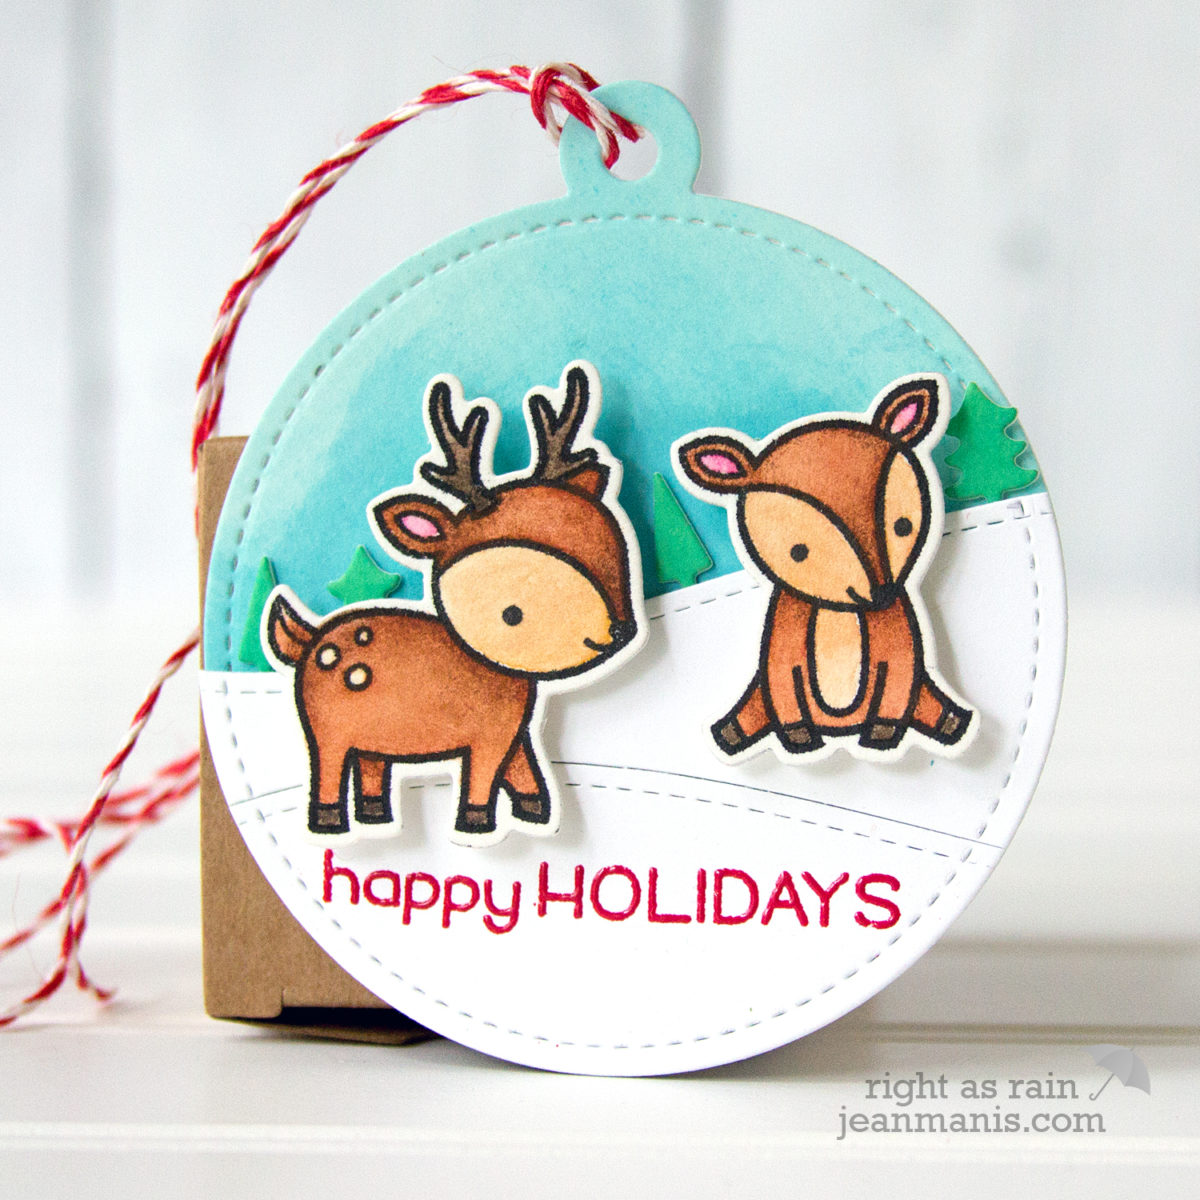 The 25 Days of Christmas Tags 2017 – Day 12 Lawn Fawn